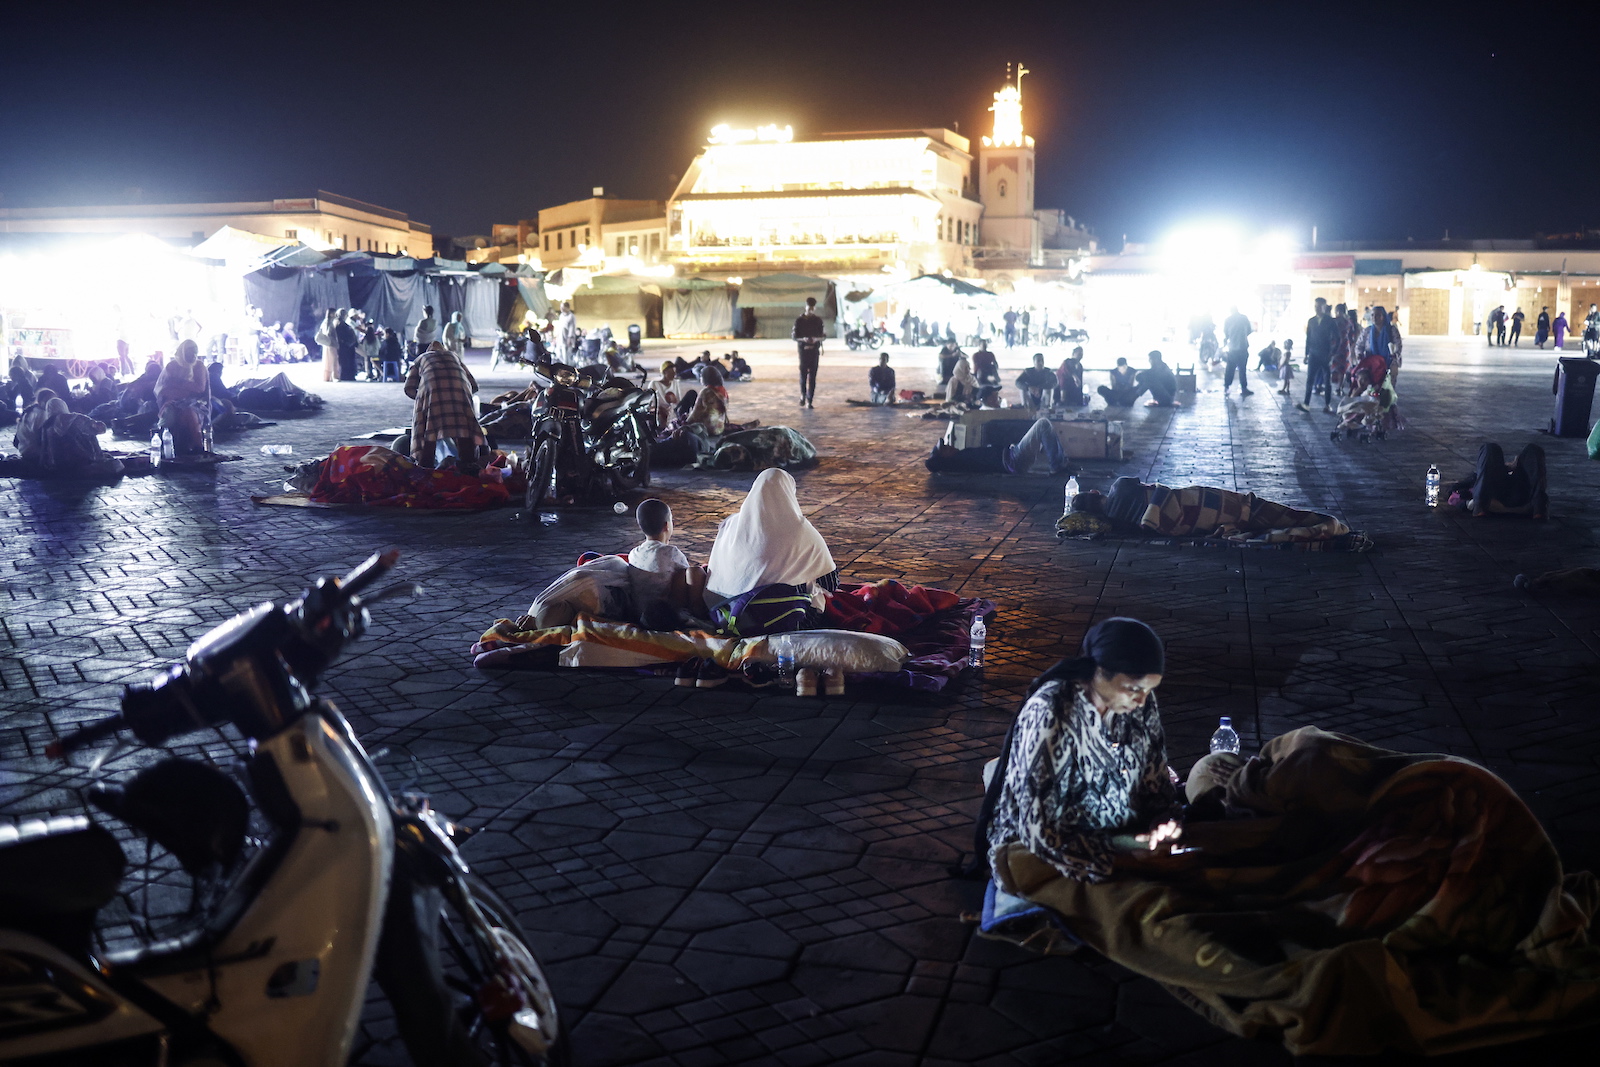 epa10851792 Hundreds of people sleep outside on Jeema El Fna square after a powerful earthquake hit Morocco, in Marrakech, Morocco, early 10 September 2023. A powerful earthquake that hit central Morocco late 08 September, killed 1,037 people and injured more than 1,200 others, the country's Interior Ministry announced on 09 September cited by public television. The earthquake, measuring magnitude 6.8 according to the USGS, damaged buildings from villages and towns in the Atlas Mountains to Marrakesh.  EPA/YOAN VALAT